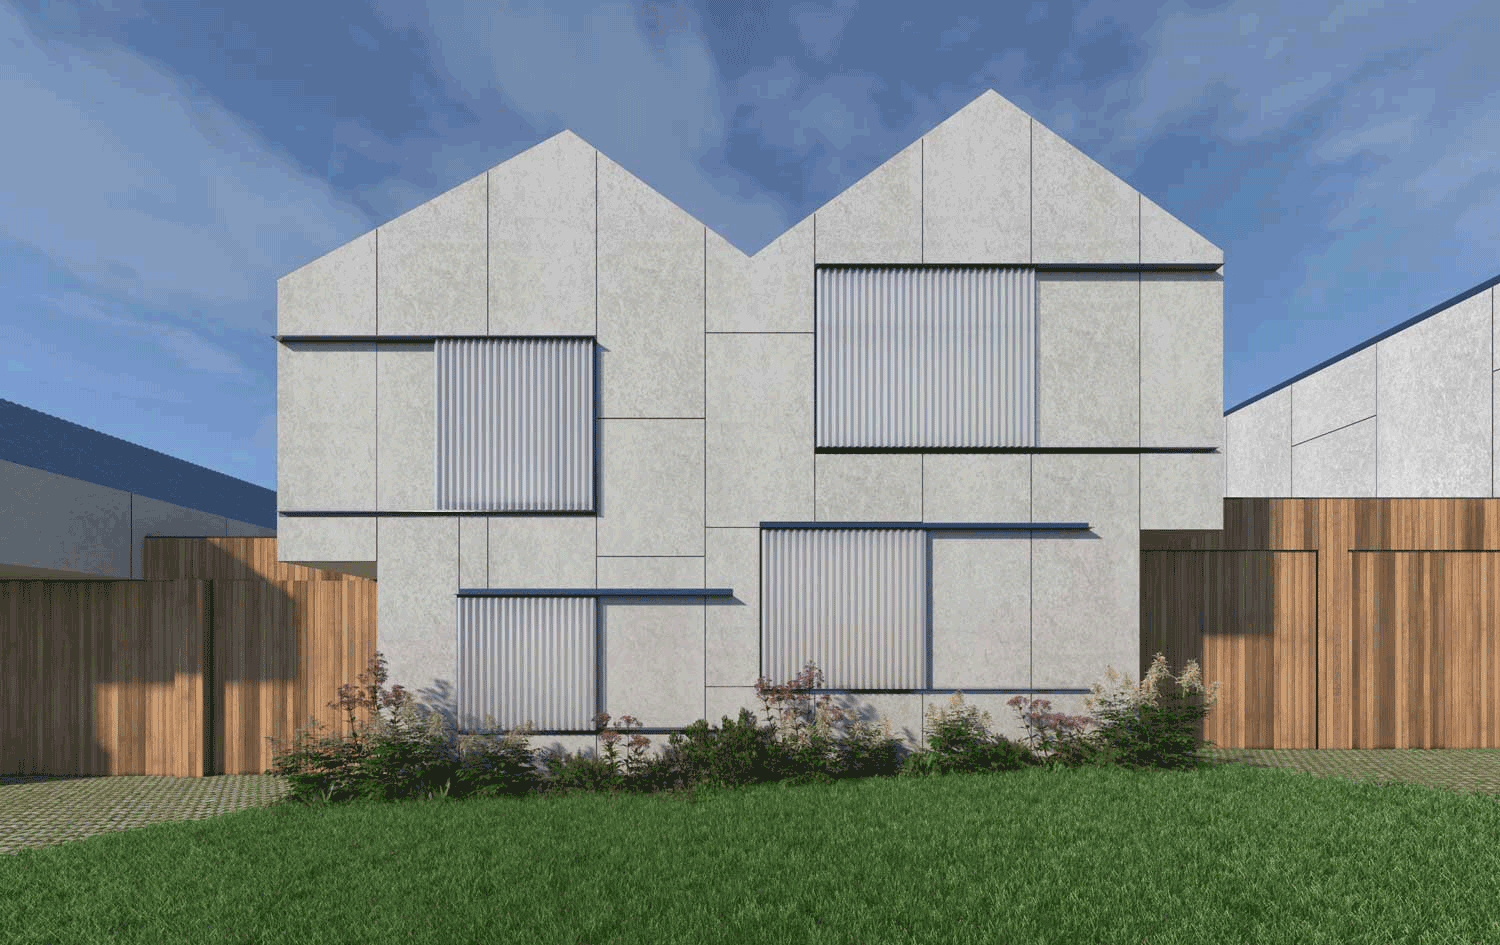 social-housing-by-warc-studio-architects-01.gif